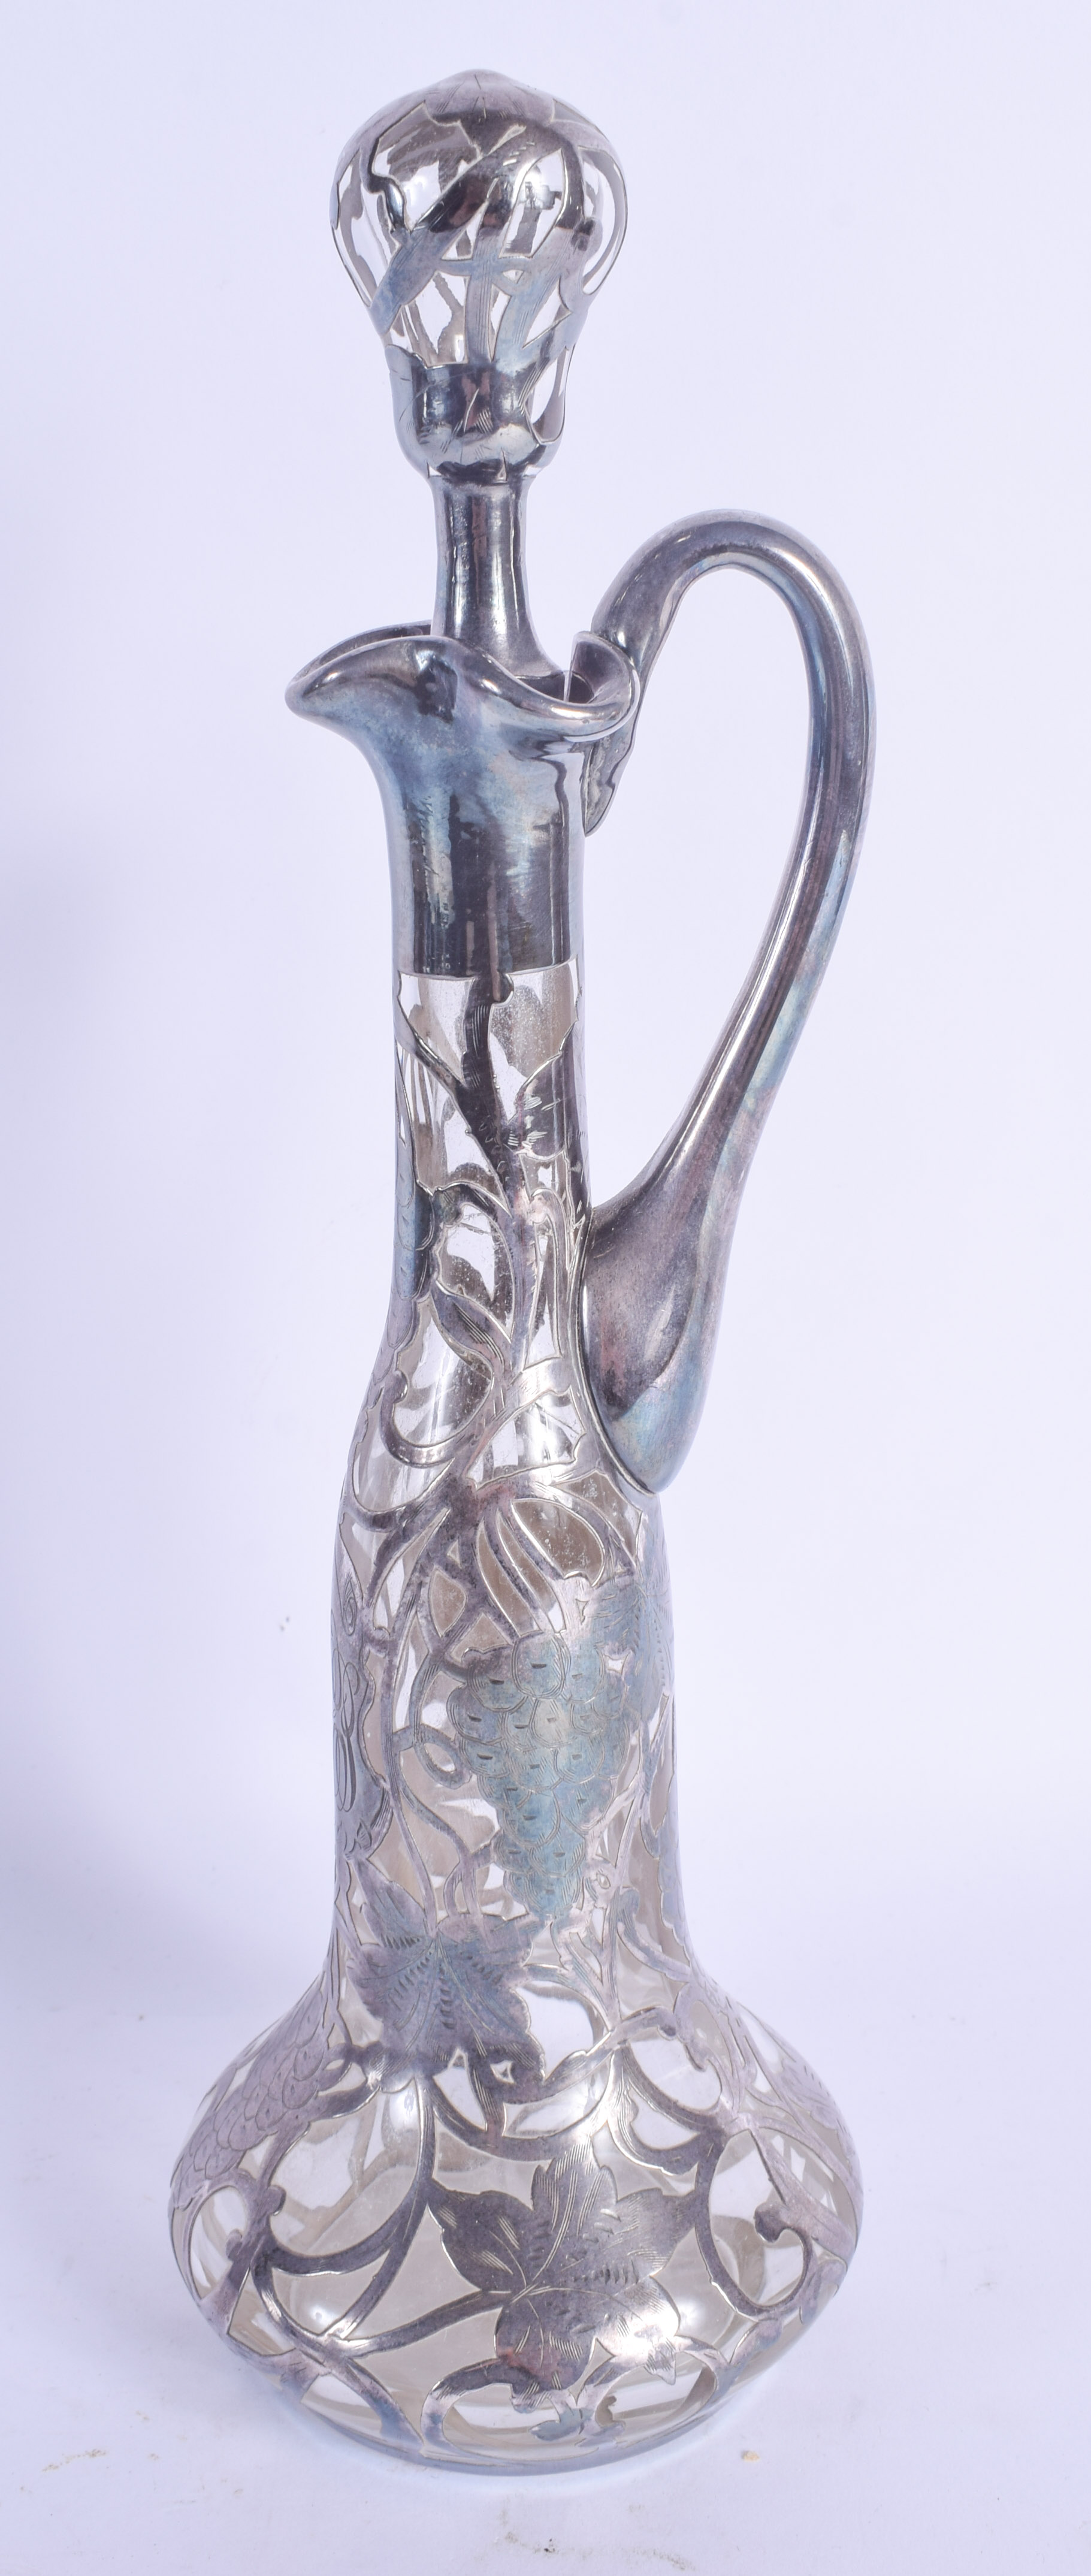 AN ART NOUVEAU SILVER OVERLAID GLASS DECANTER AND STOPPER. 28 cm high. - Image 2 of 2